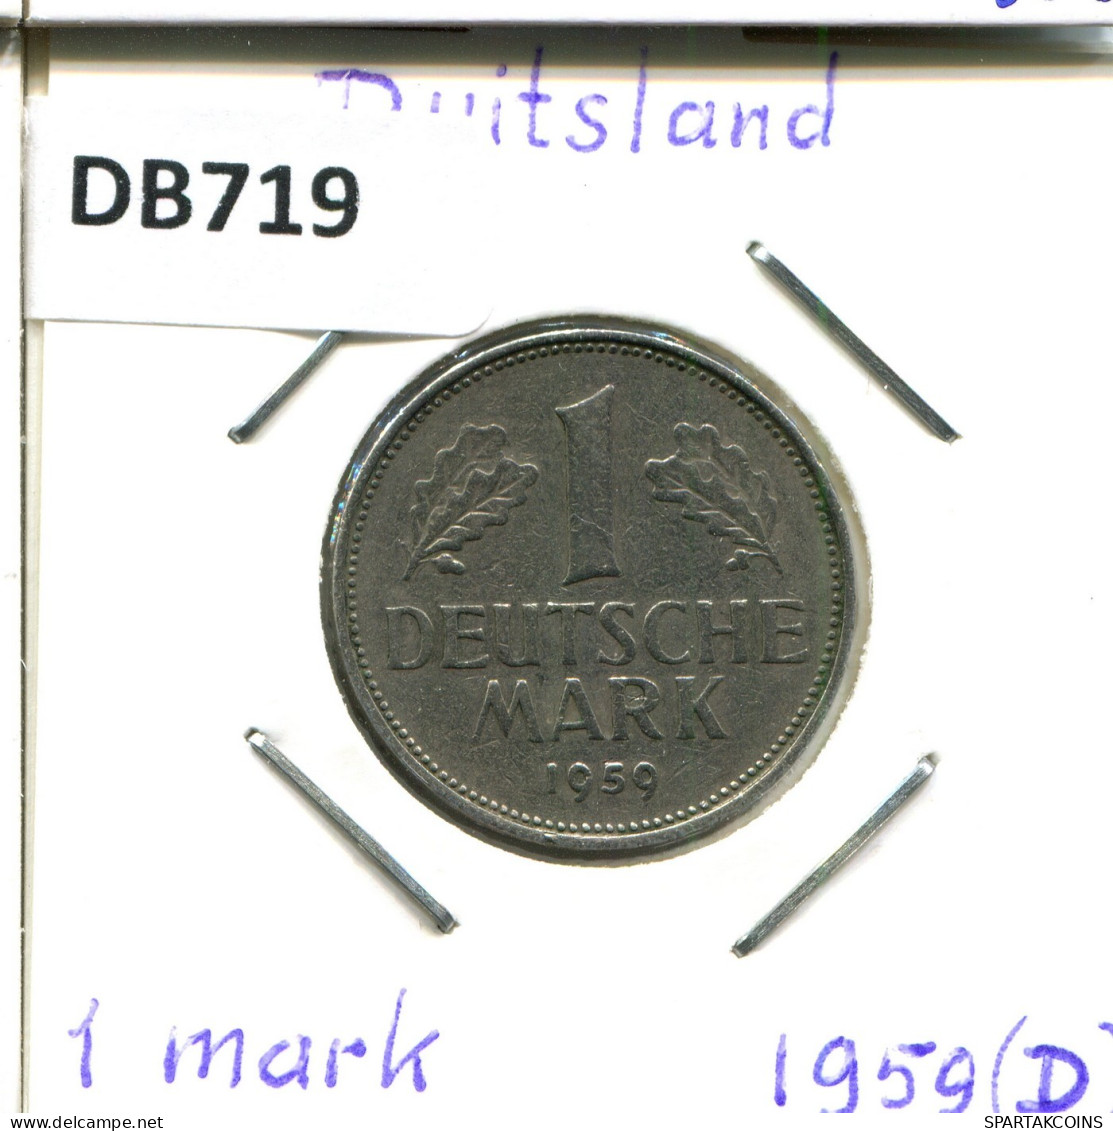 1 DM 1959 D WEST & UNIFIED GERMANY Coin #DB719.U.A - 1 Mark